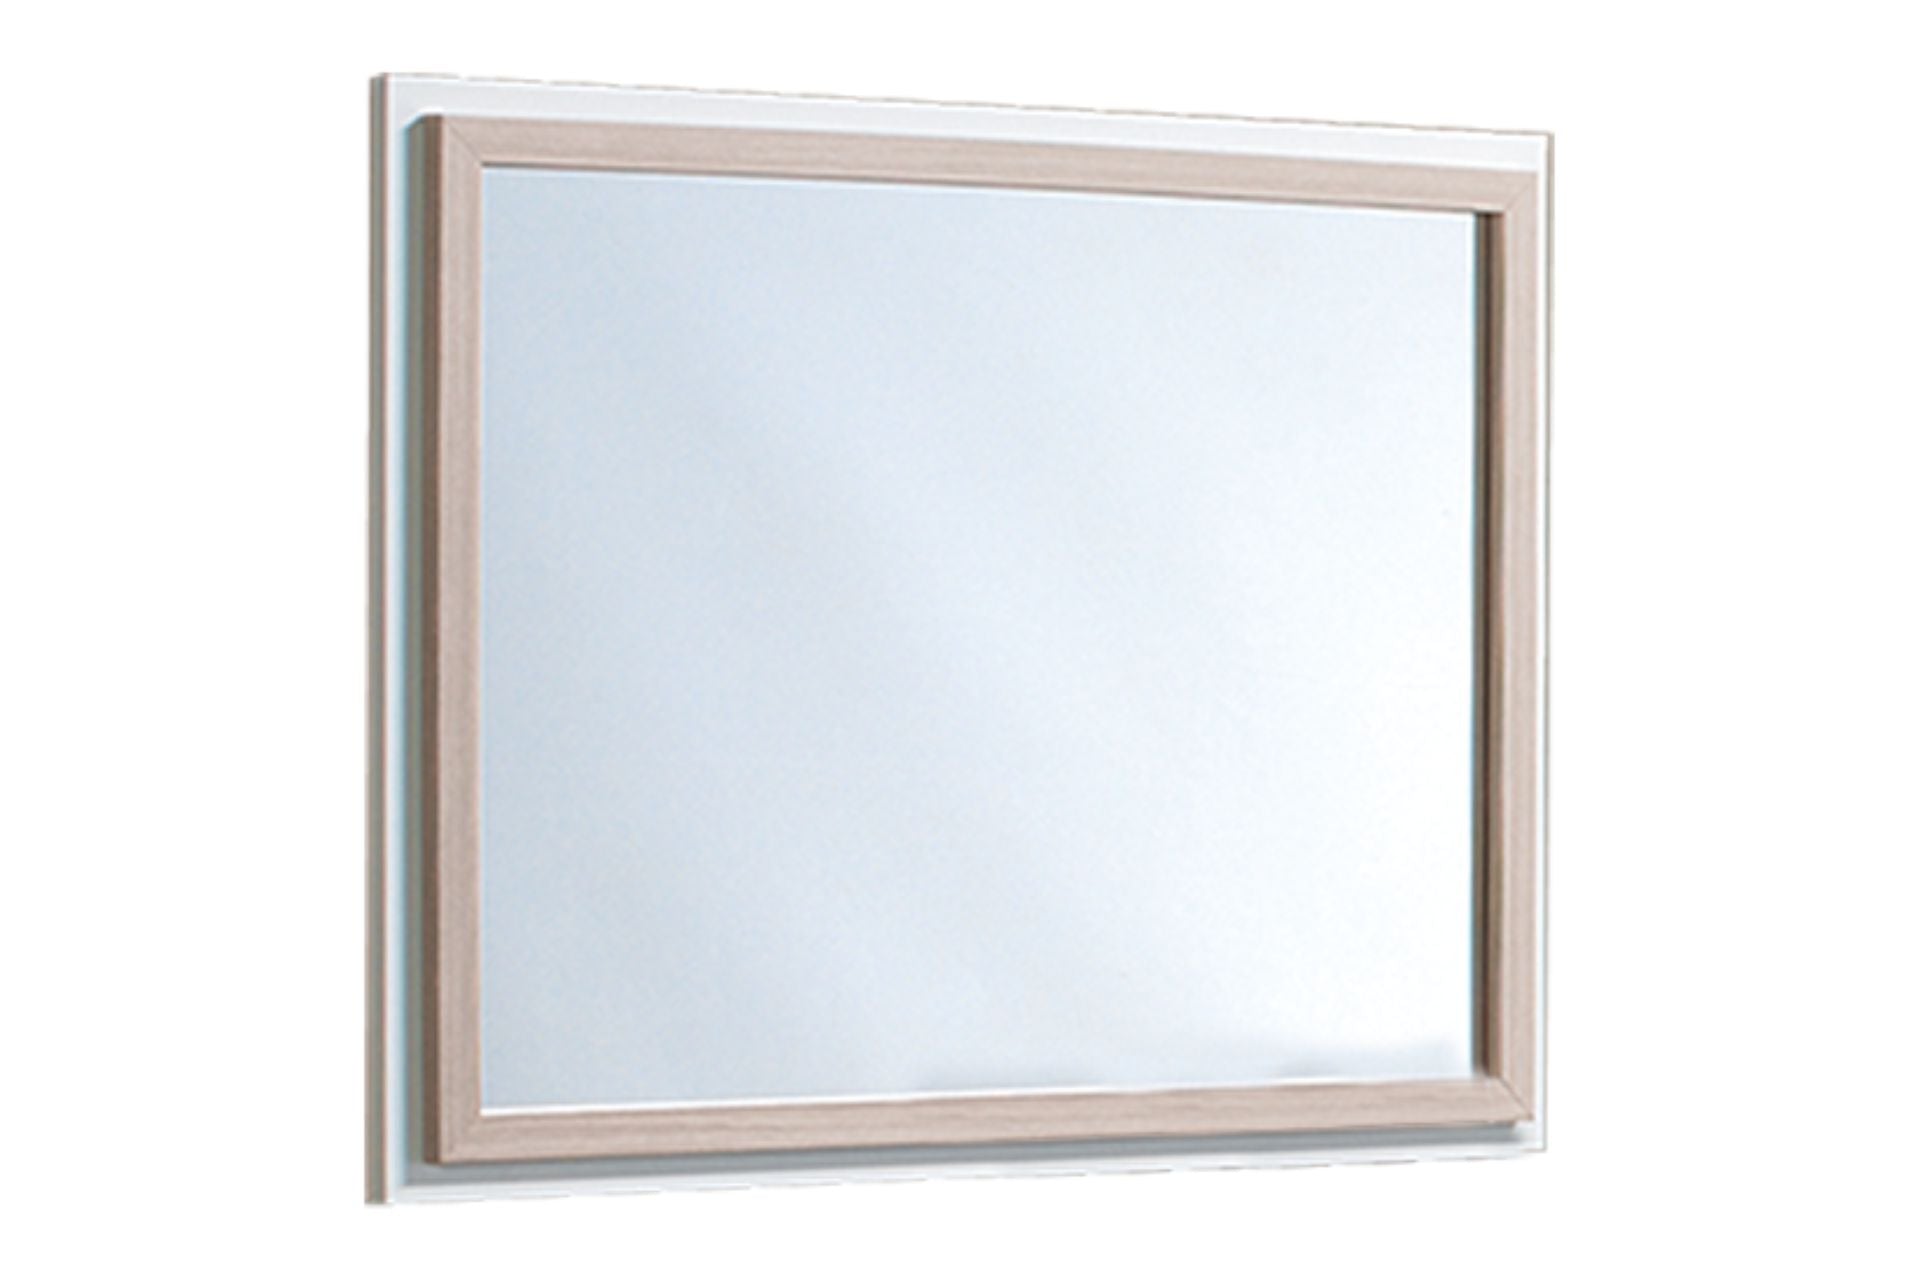 Framed bedroom mirror. This mirror is framed in white wood and a light oak wood finish.